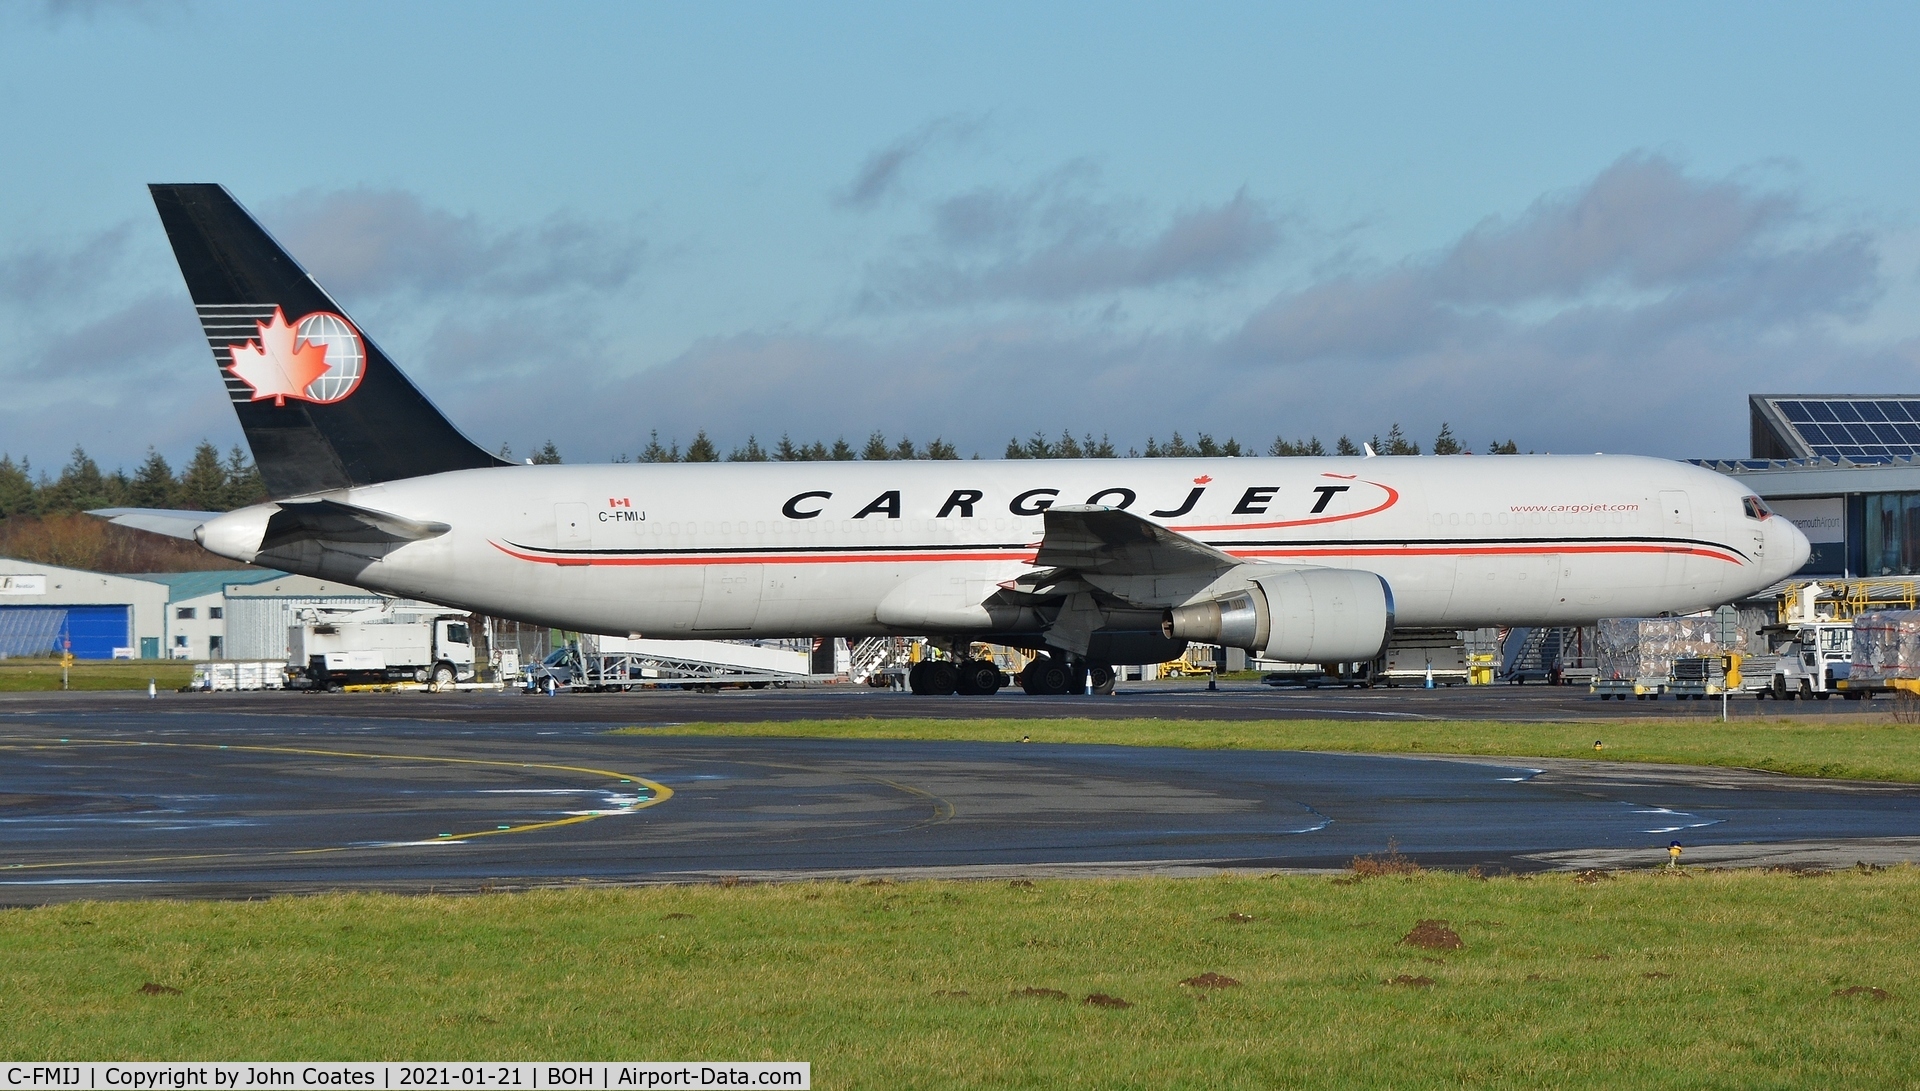 C-FMIJ, 1993 Boeing 767-328/ER C/N 27135, Rare visitor on stand